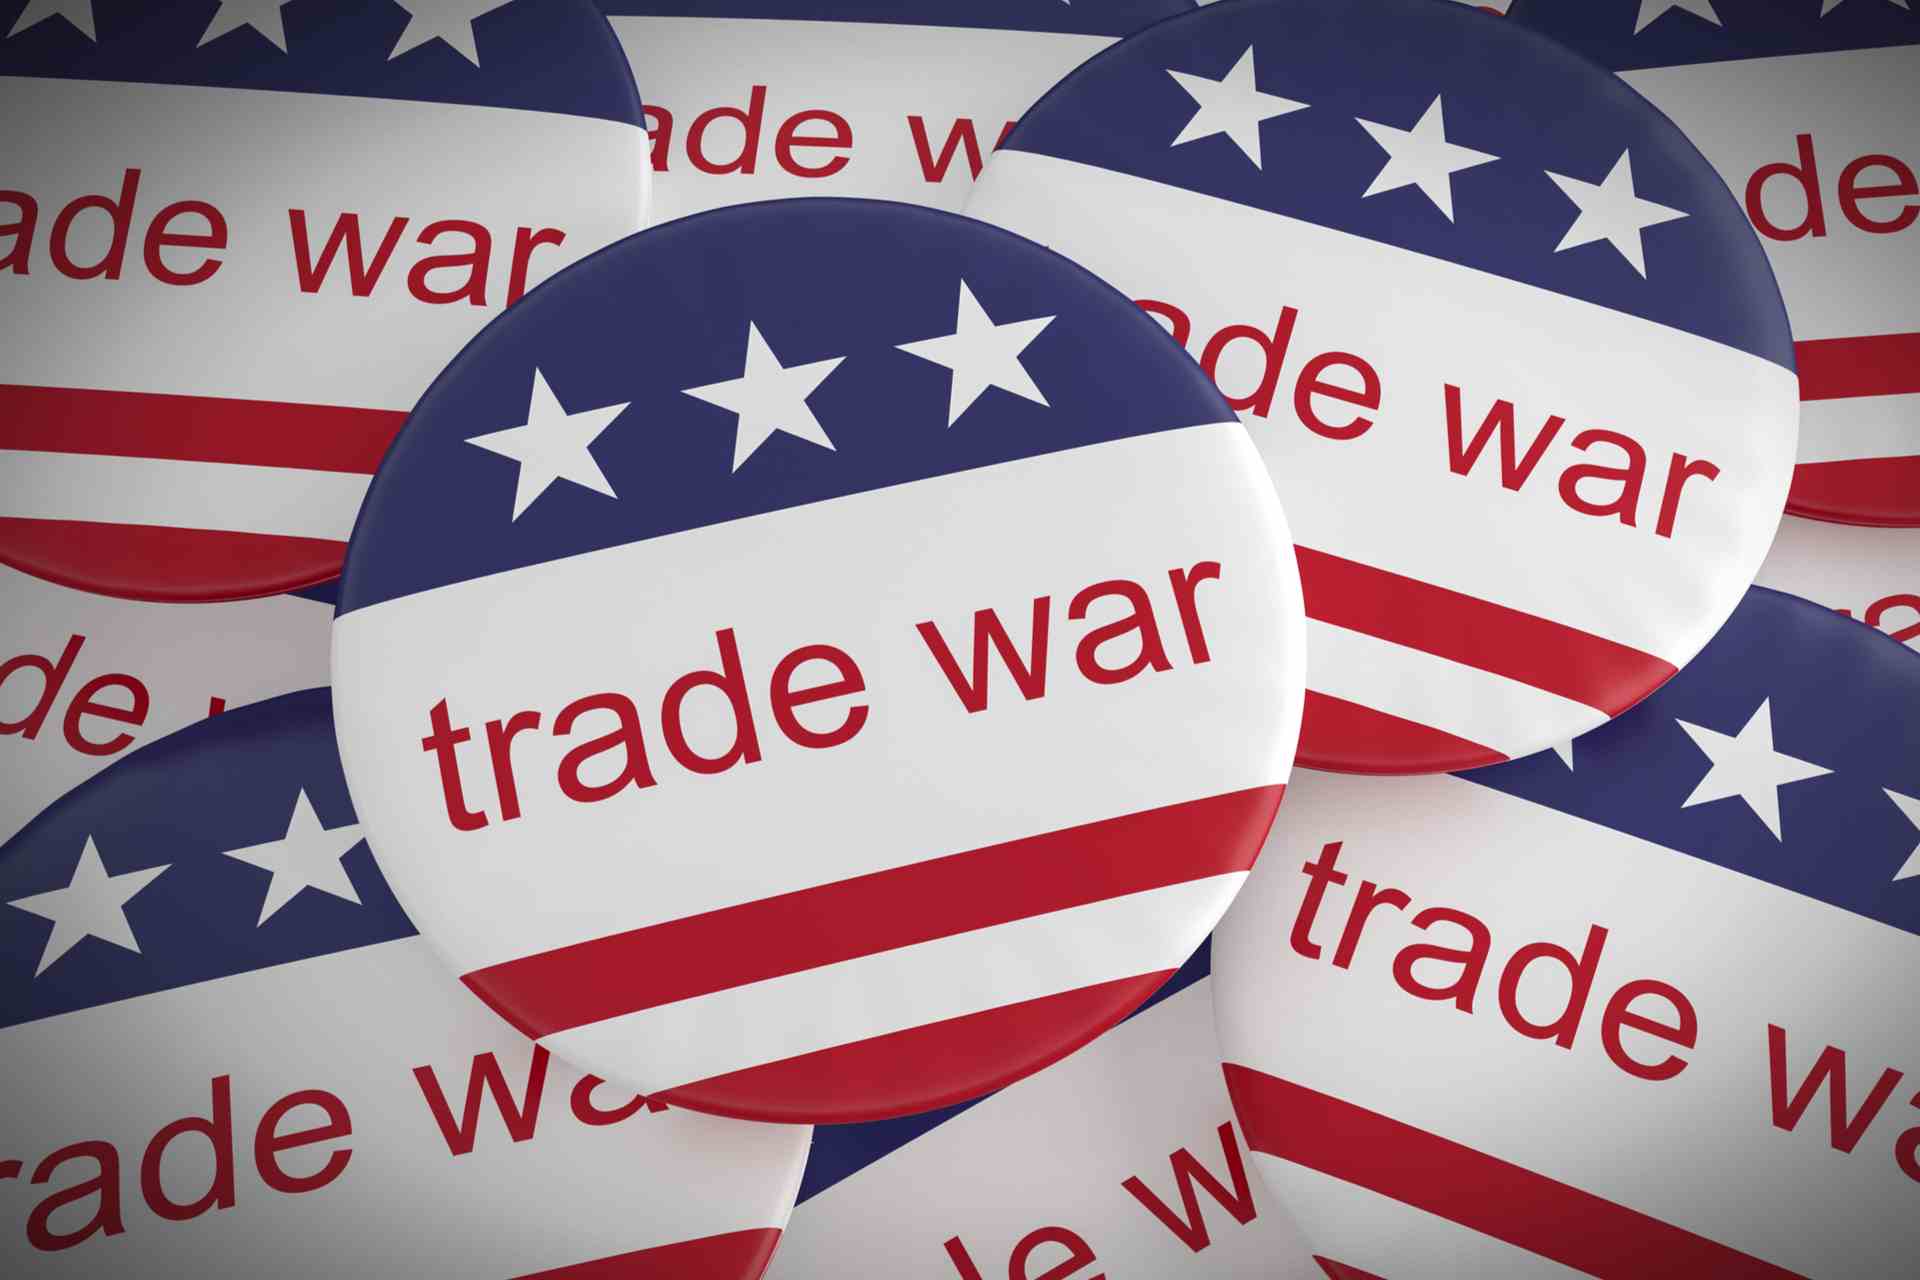 Forex is the next trade war frontier